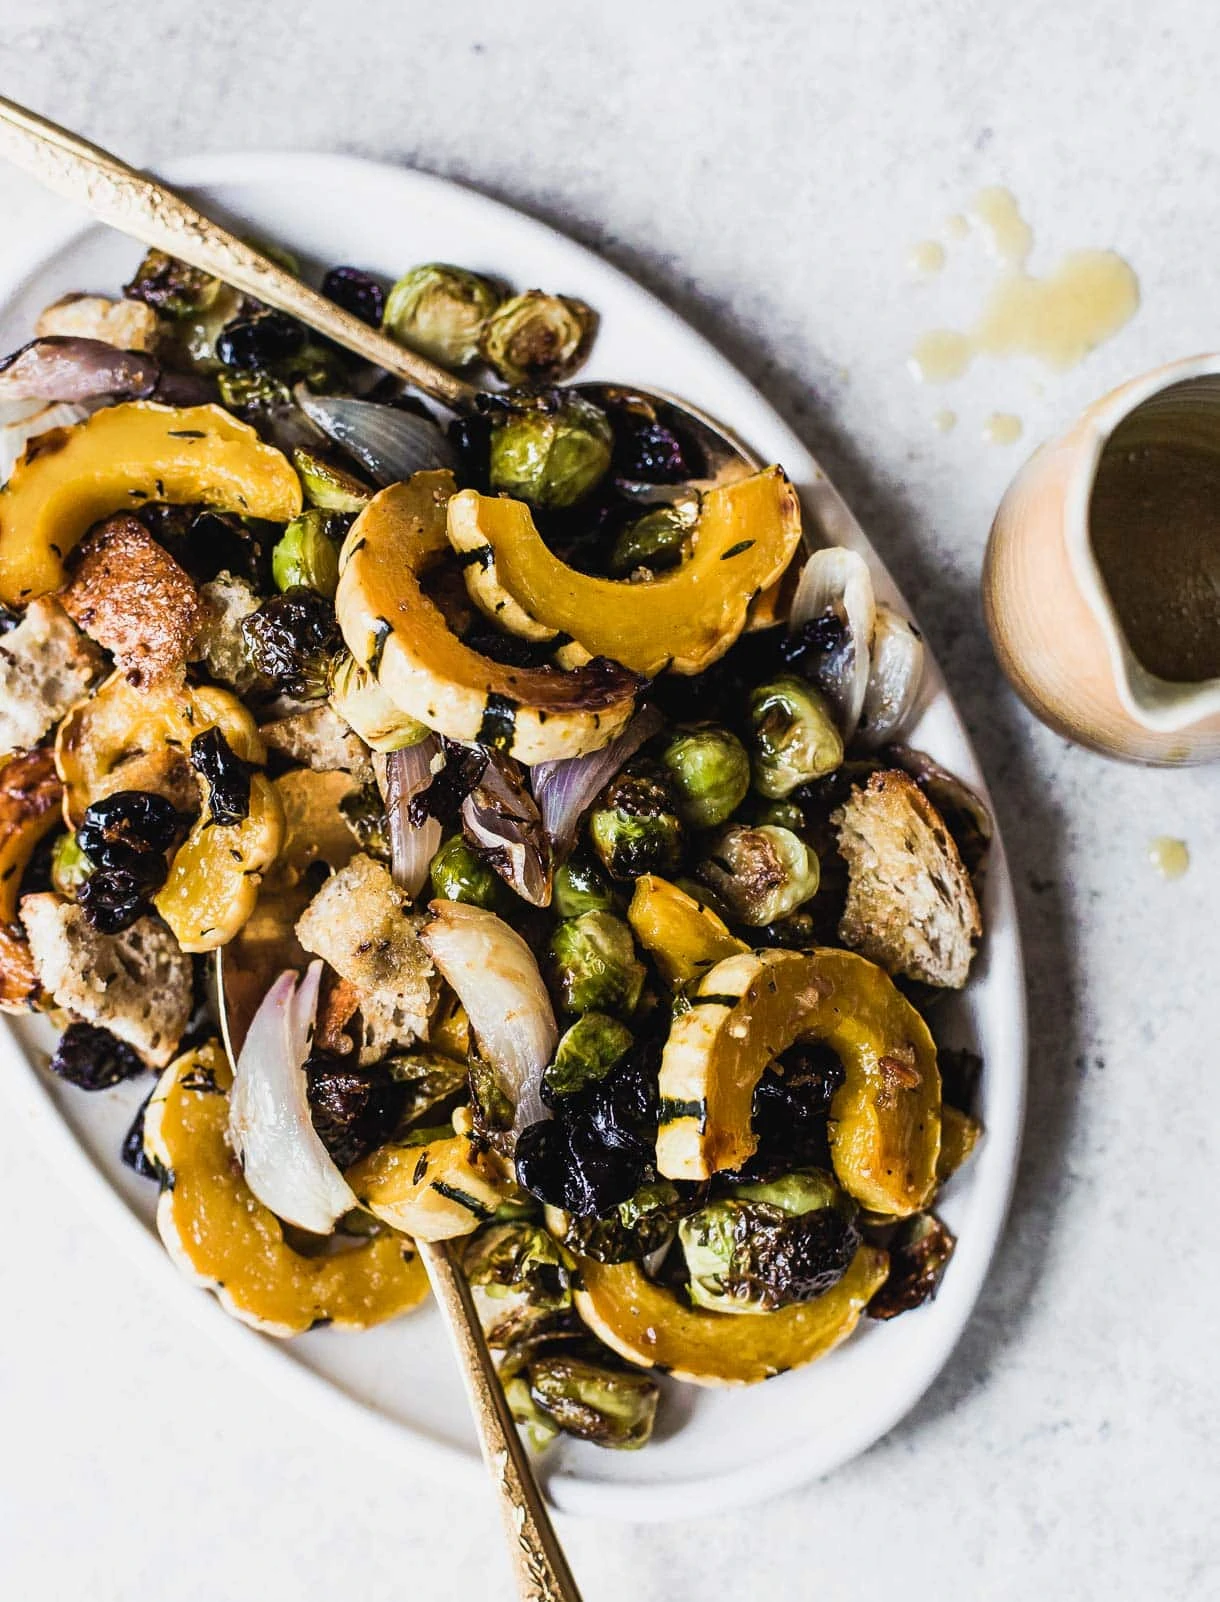 Vegetarian Sheet Pan Stuffing with squash, brussels sprouts, and dried tart cherries